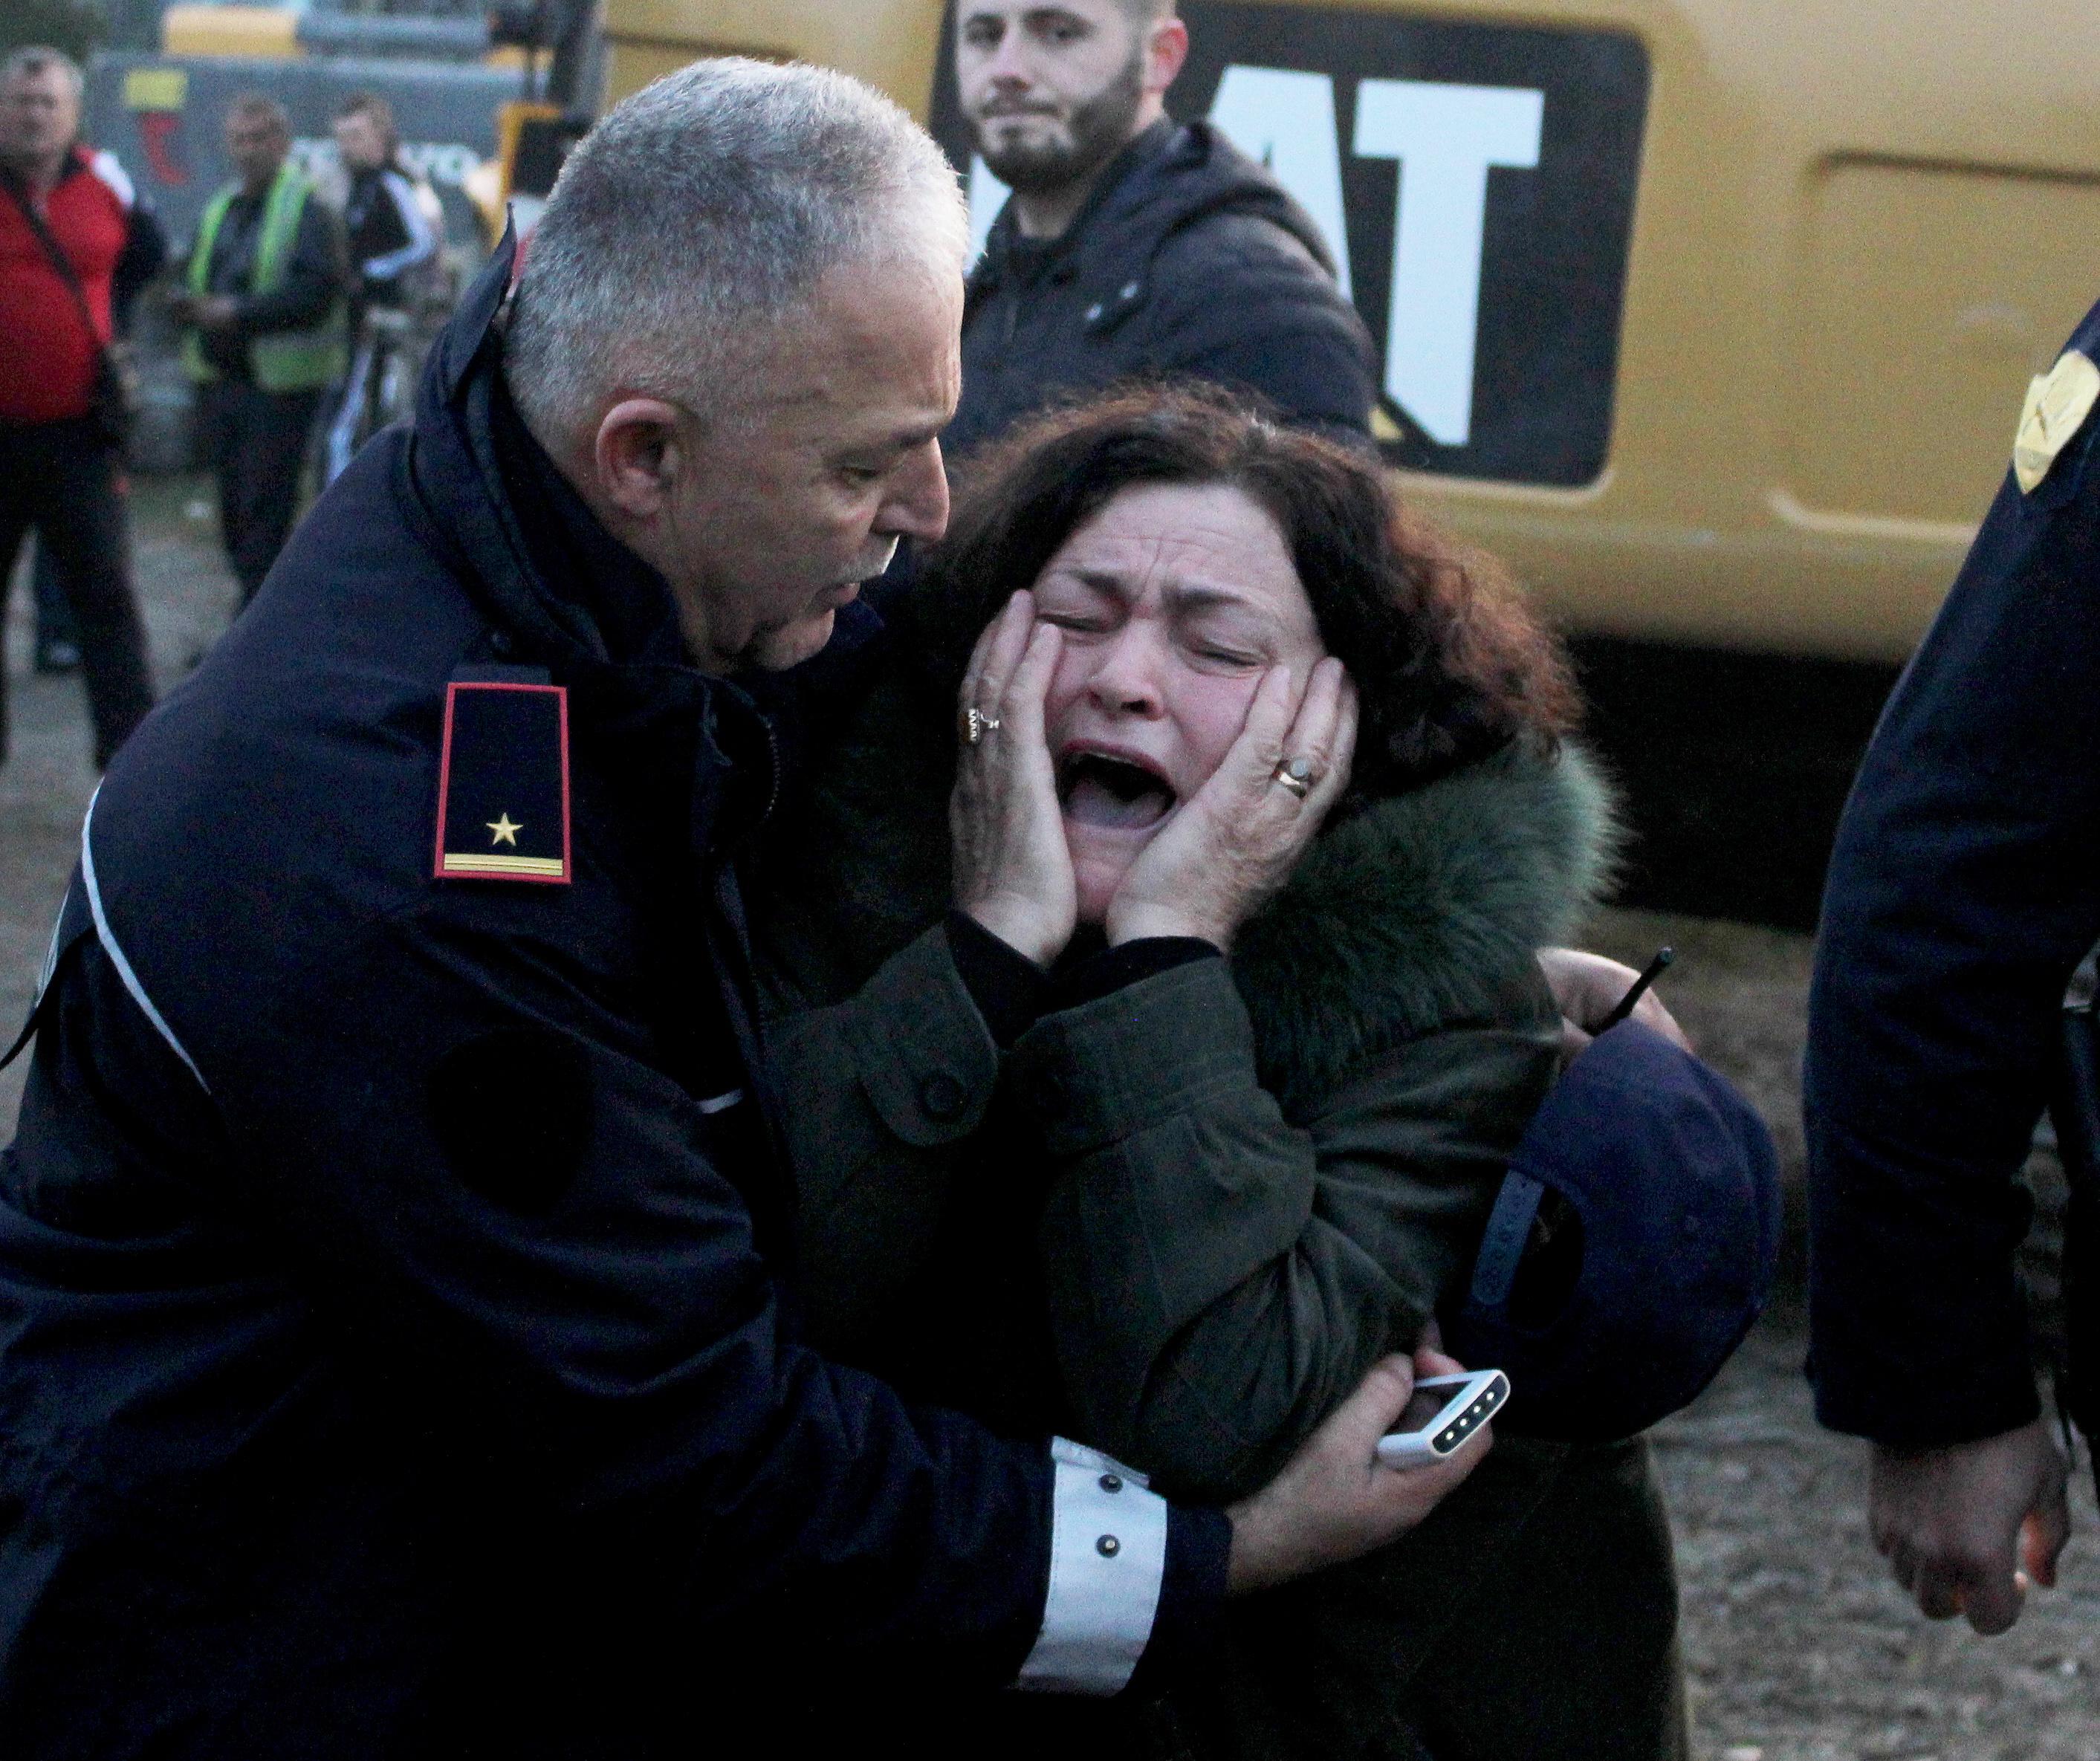 epa08025913 A woman cries as her relatives are trapped in a building after an earthquake hit Thumane, Albania, 25 November 2019. Albania was hit by a 6.4 magnitude earthquake on 26 November 2019, leaving three people dead and dozens injured.  EPA/MALTON DIBRA